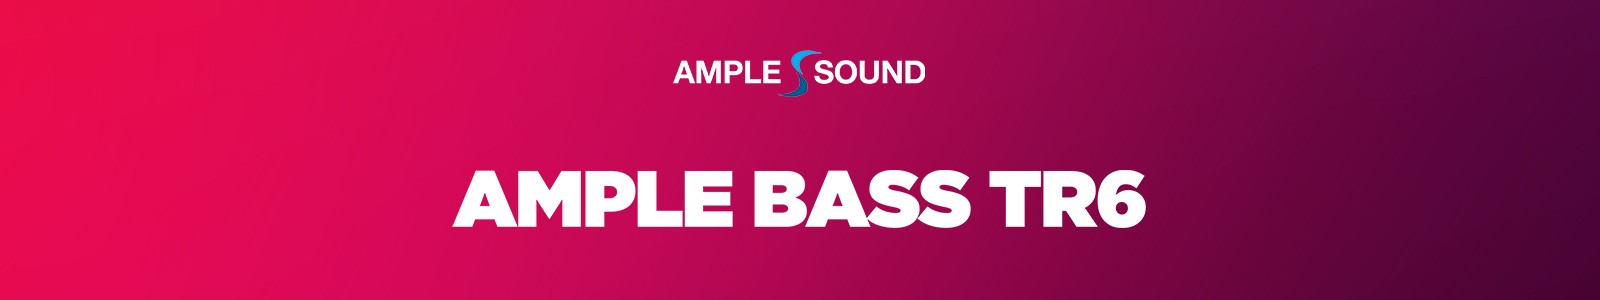 Ample Bass TR6 by AmpleSound